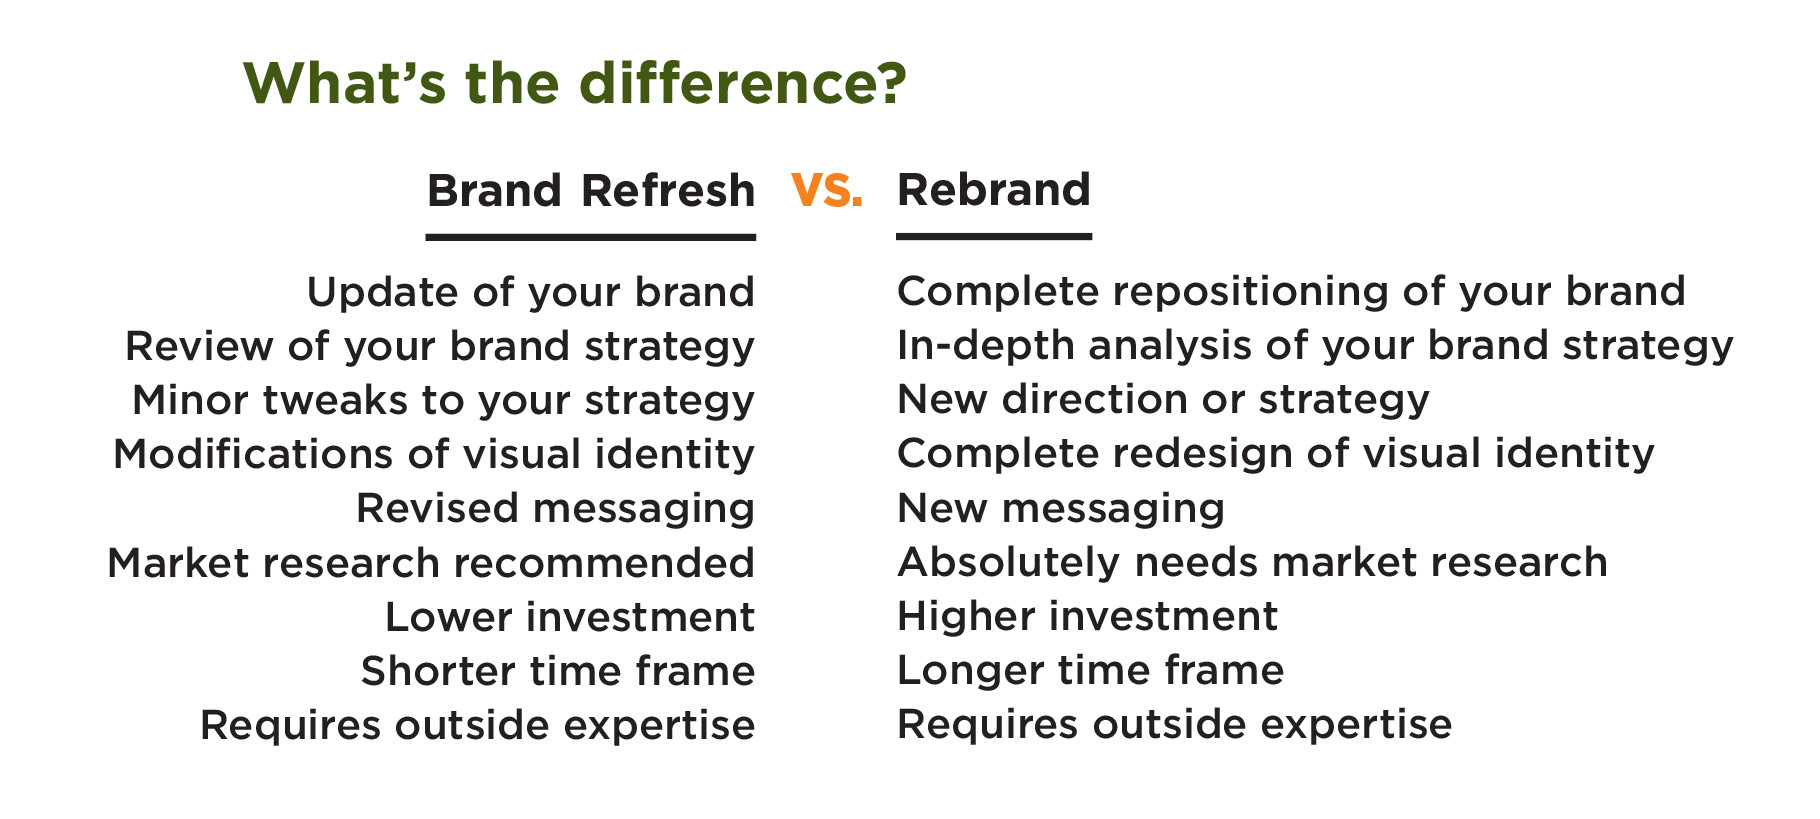 Graphic Showing the Difference Between Brand Refresh or Rebrand